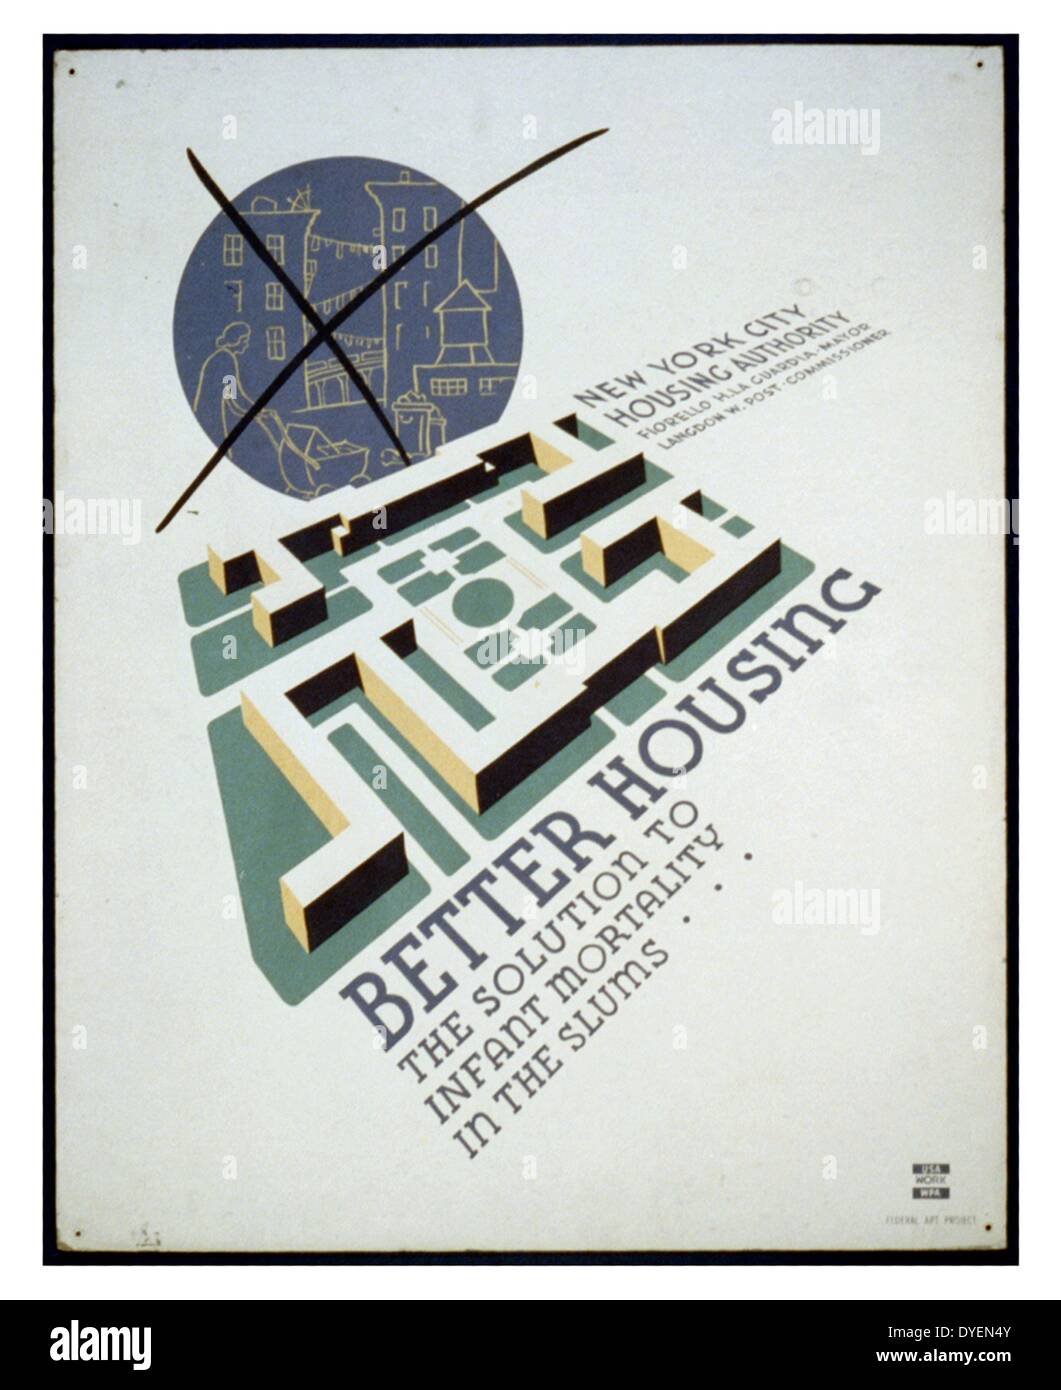 Better housing The solution to infant mortality in the slums. Poster by Anthony Velonis for the Federal Art Project [between 1936 and 1938]. Poster promoting better housing as a solution for high rates of infant mortality in the slums, showing a planned housing community and in the background a crossed-out telescopic view of tenement housing. Stock Photo